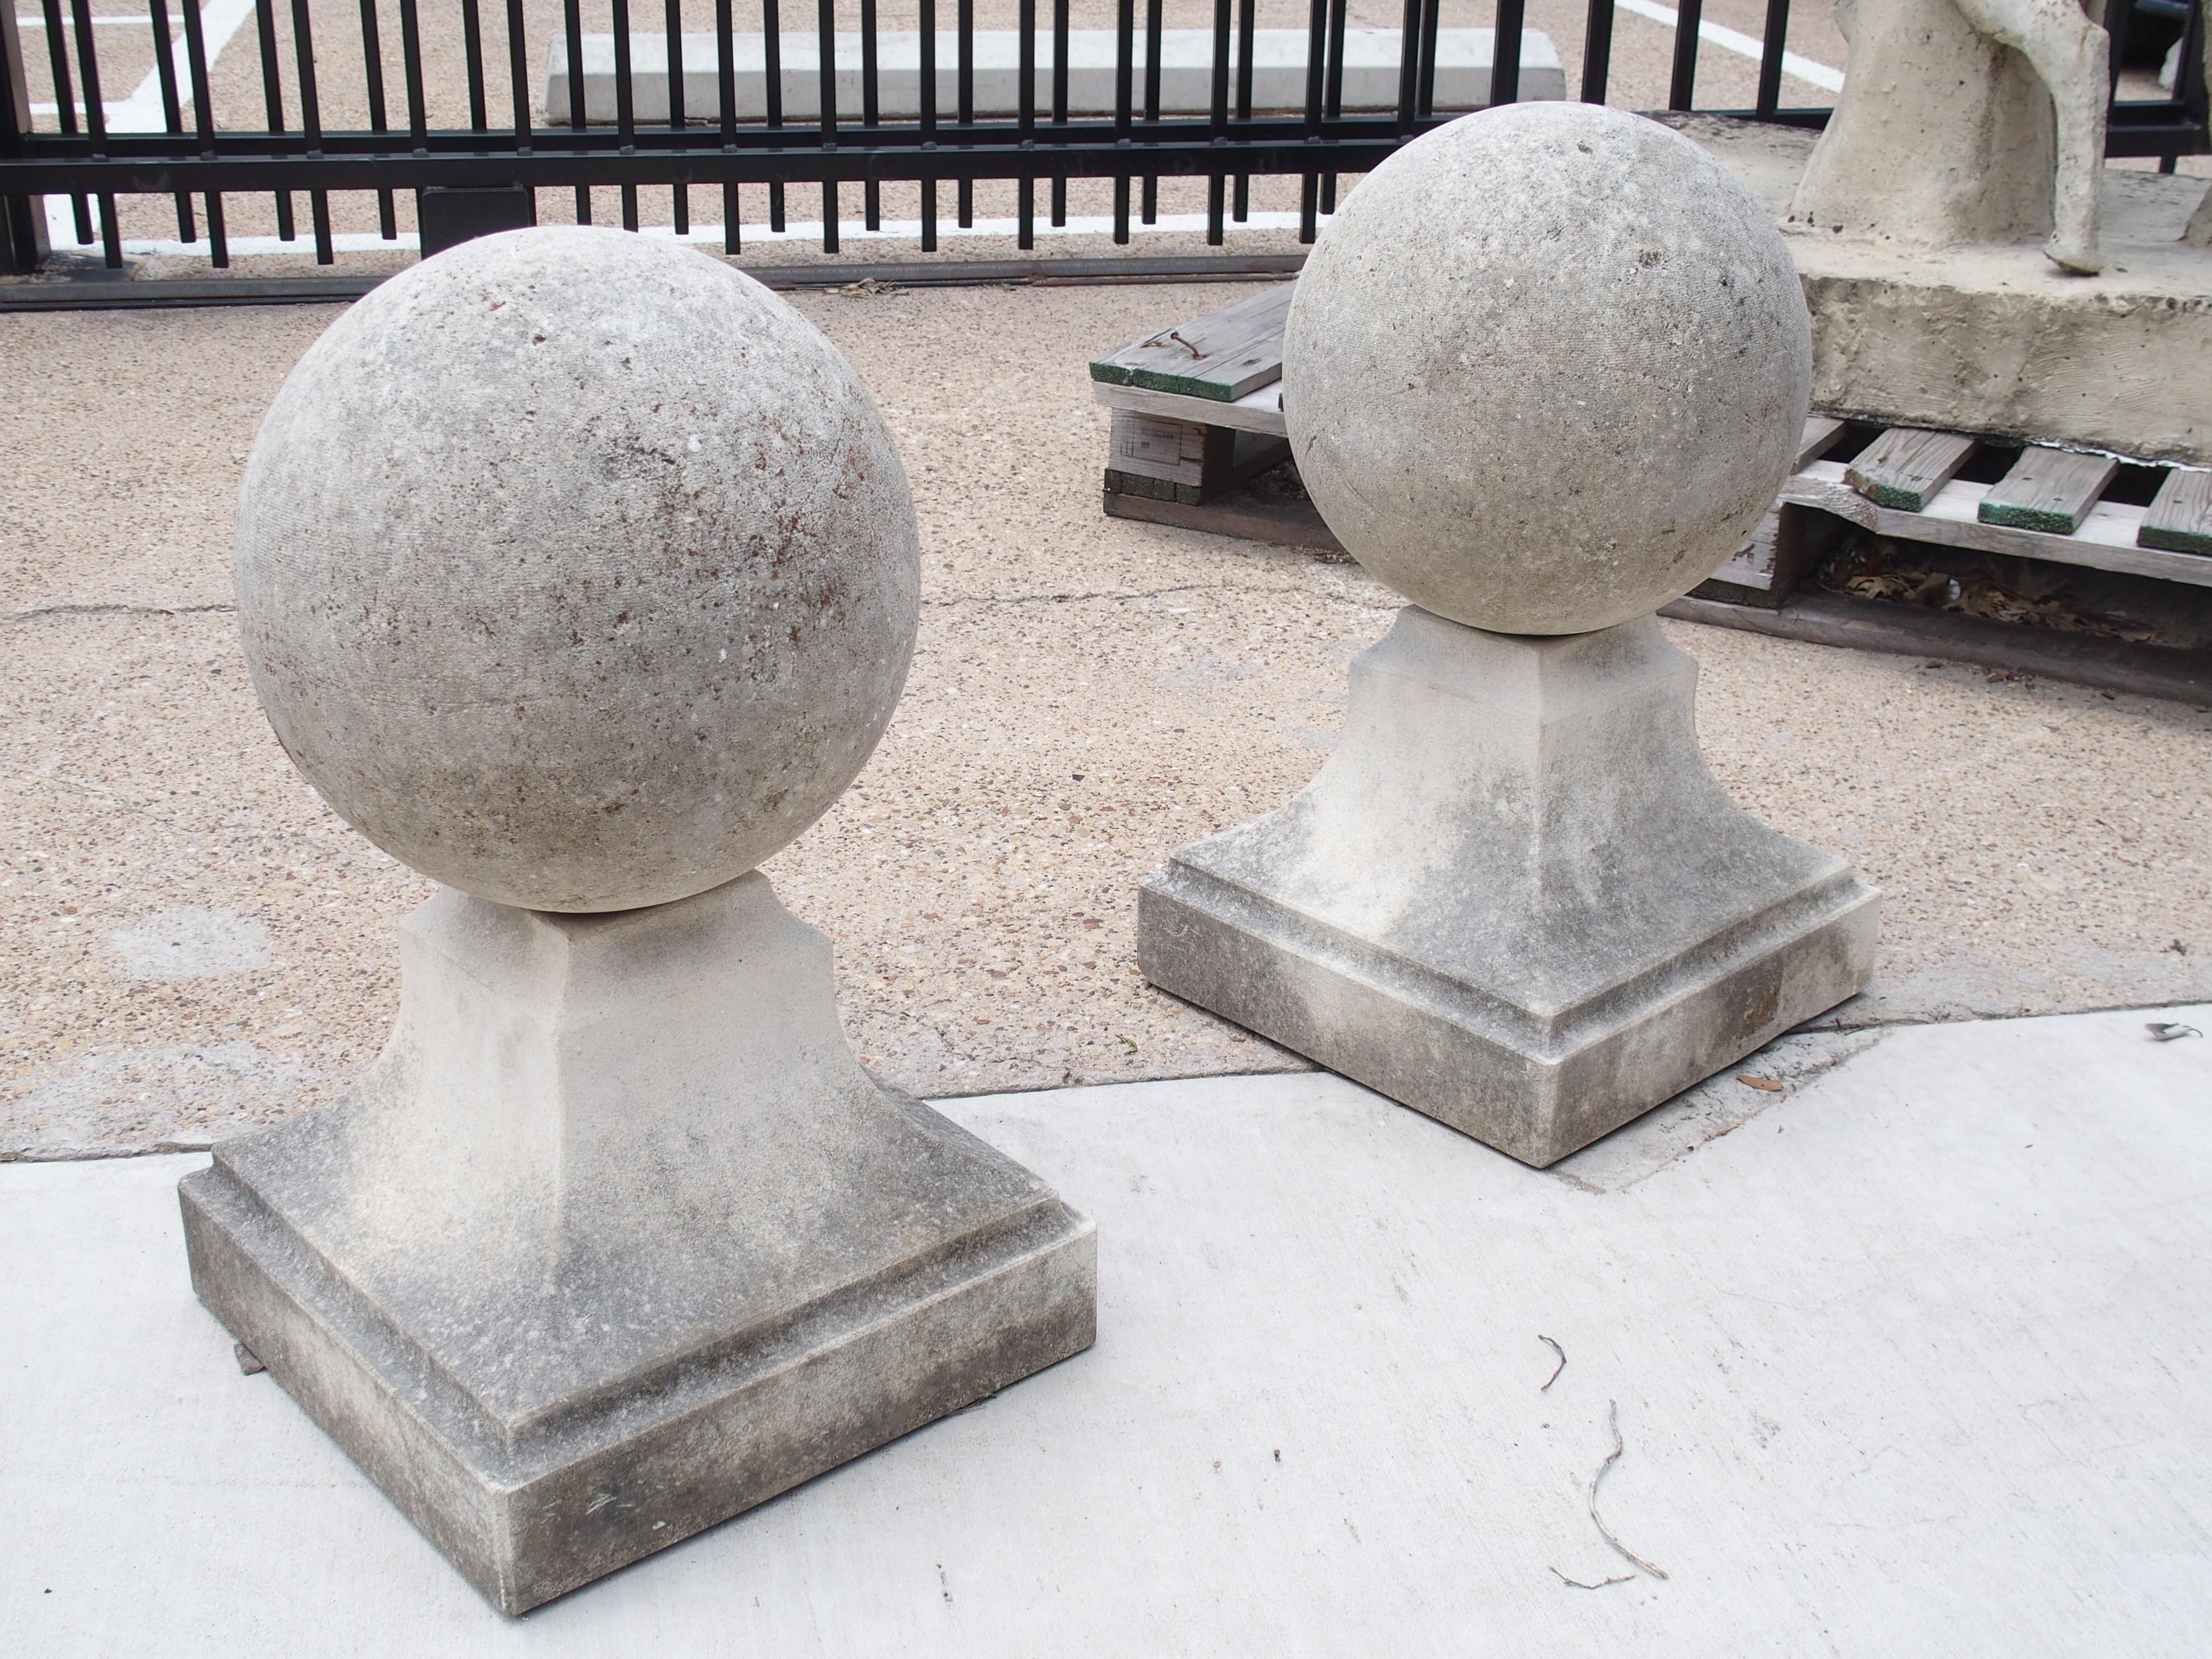 This large pair of ball finials from Italy have been hand-carved from limestone. Ball finials such as this can often be seen flanking the entry of Italian gardens. The balls are roughly 11 ¾ inches in diameter and sit atop 13 x 13 plinths. The sides